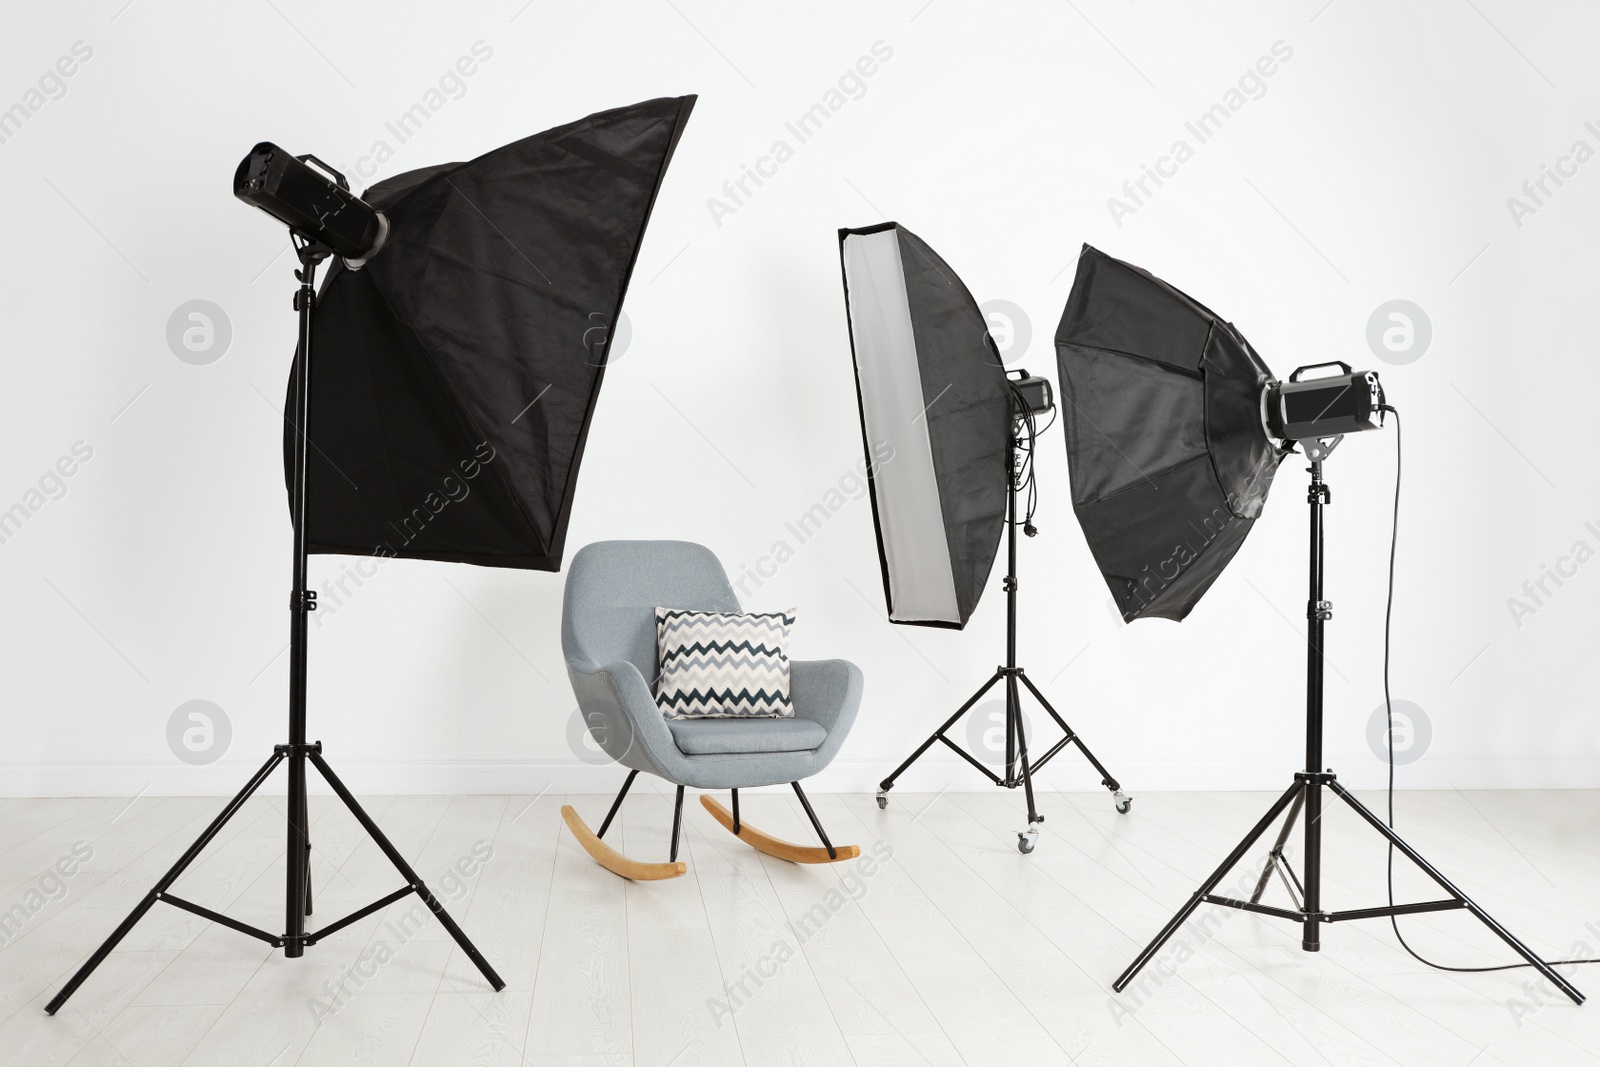 Photo of Comfortable rocking chair and professional lighting equipment in photo studio